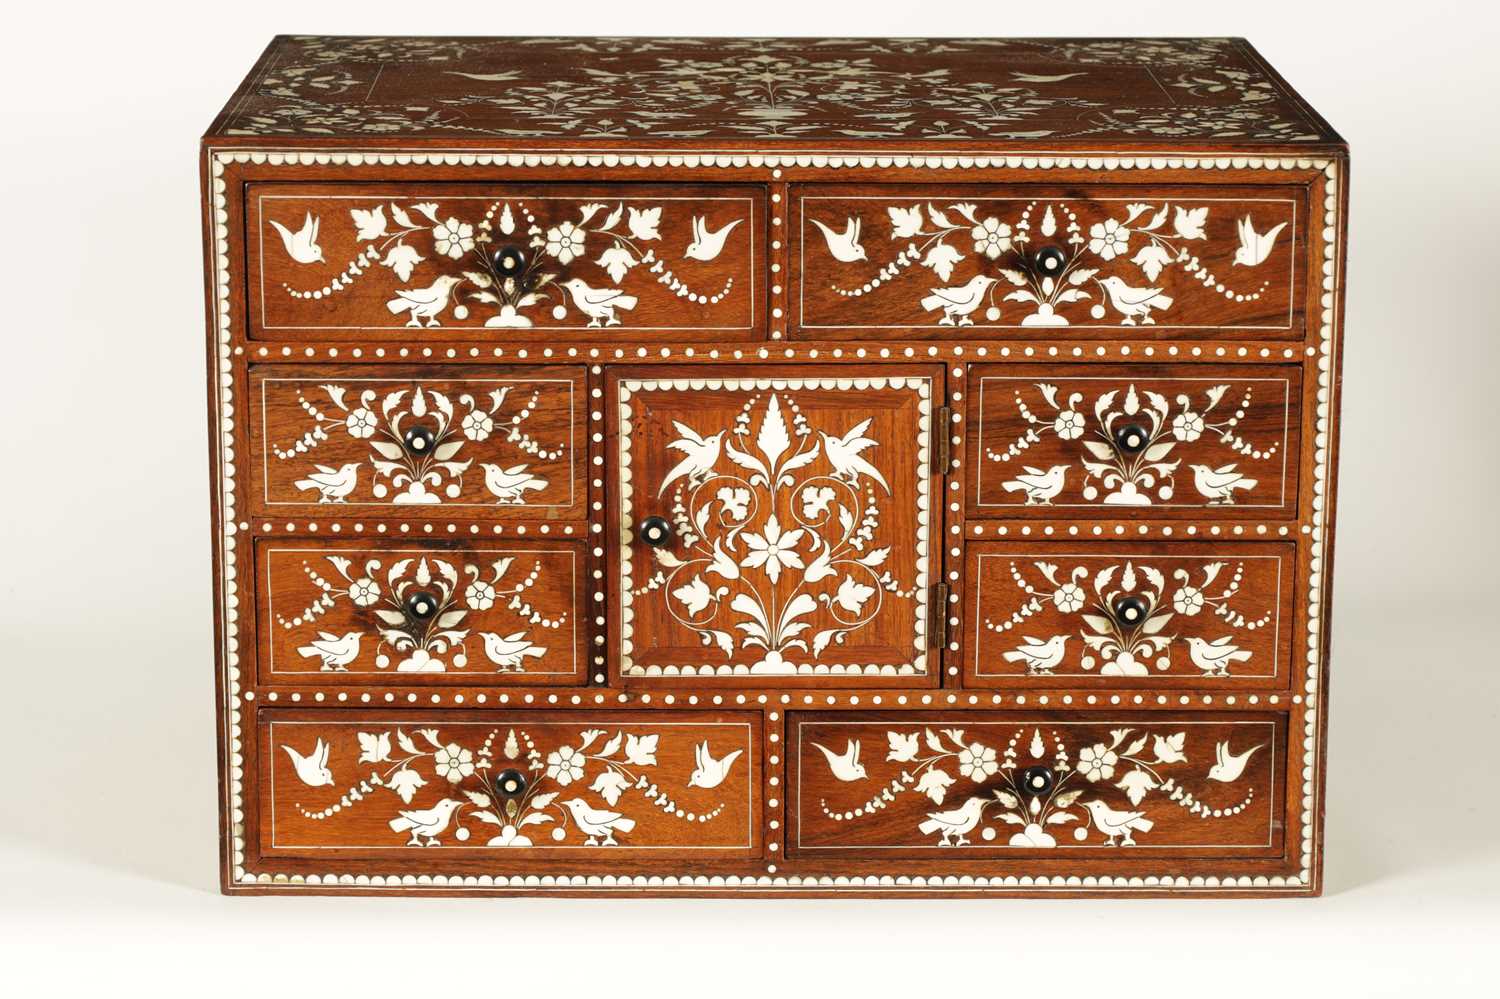 A GOOD 19TH CENTURY ANGLO INDIAN HARDWOOD AND IVORY INLAID TABLE CABINET - Image 2 of 13